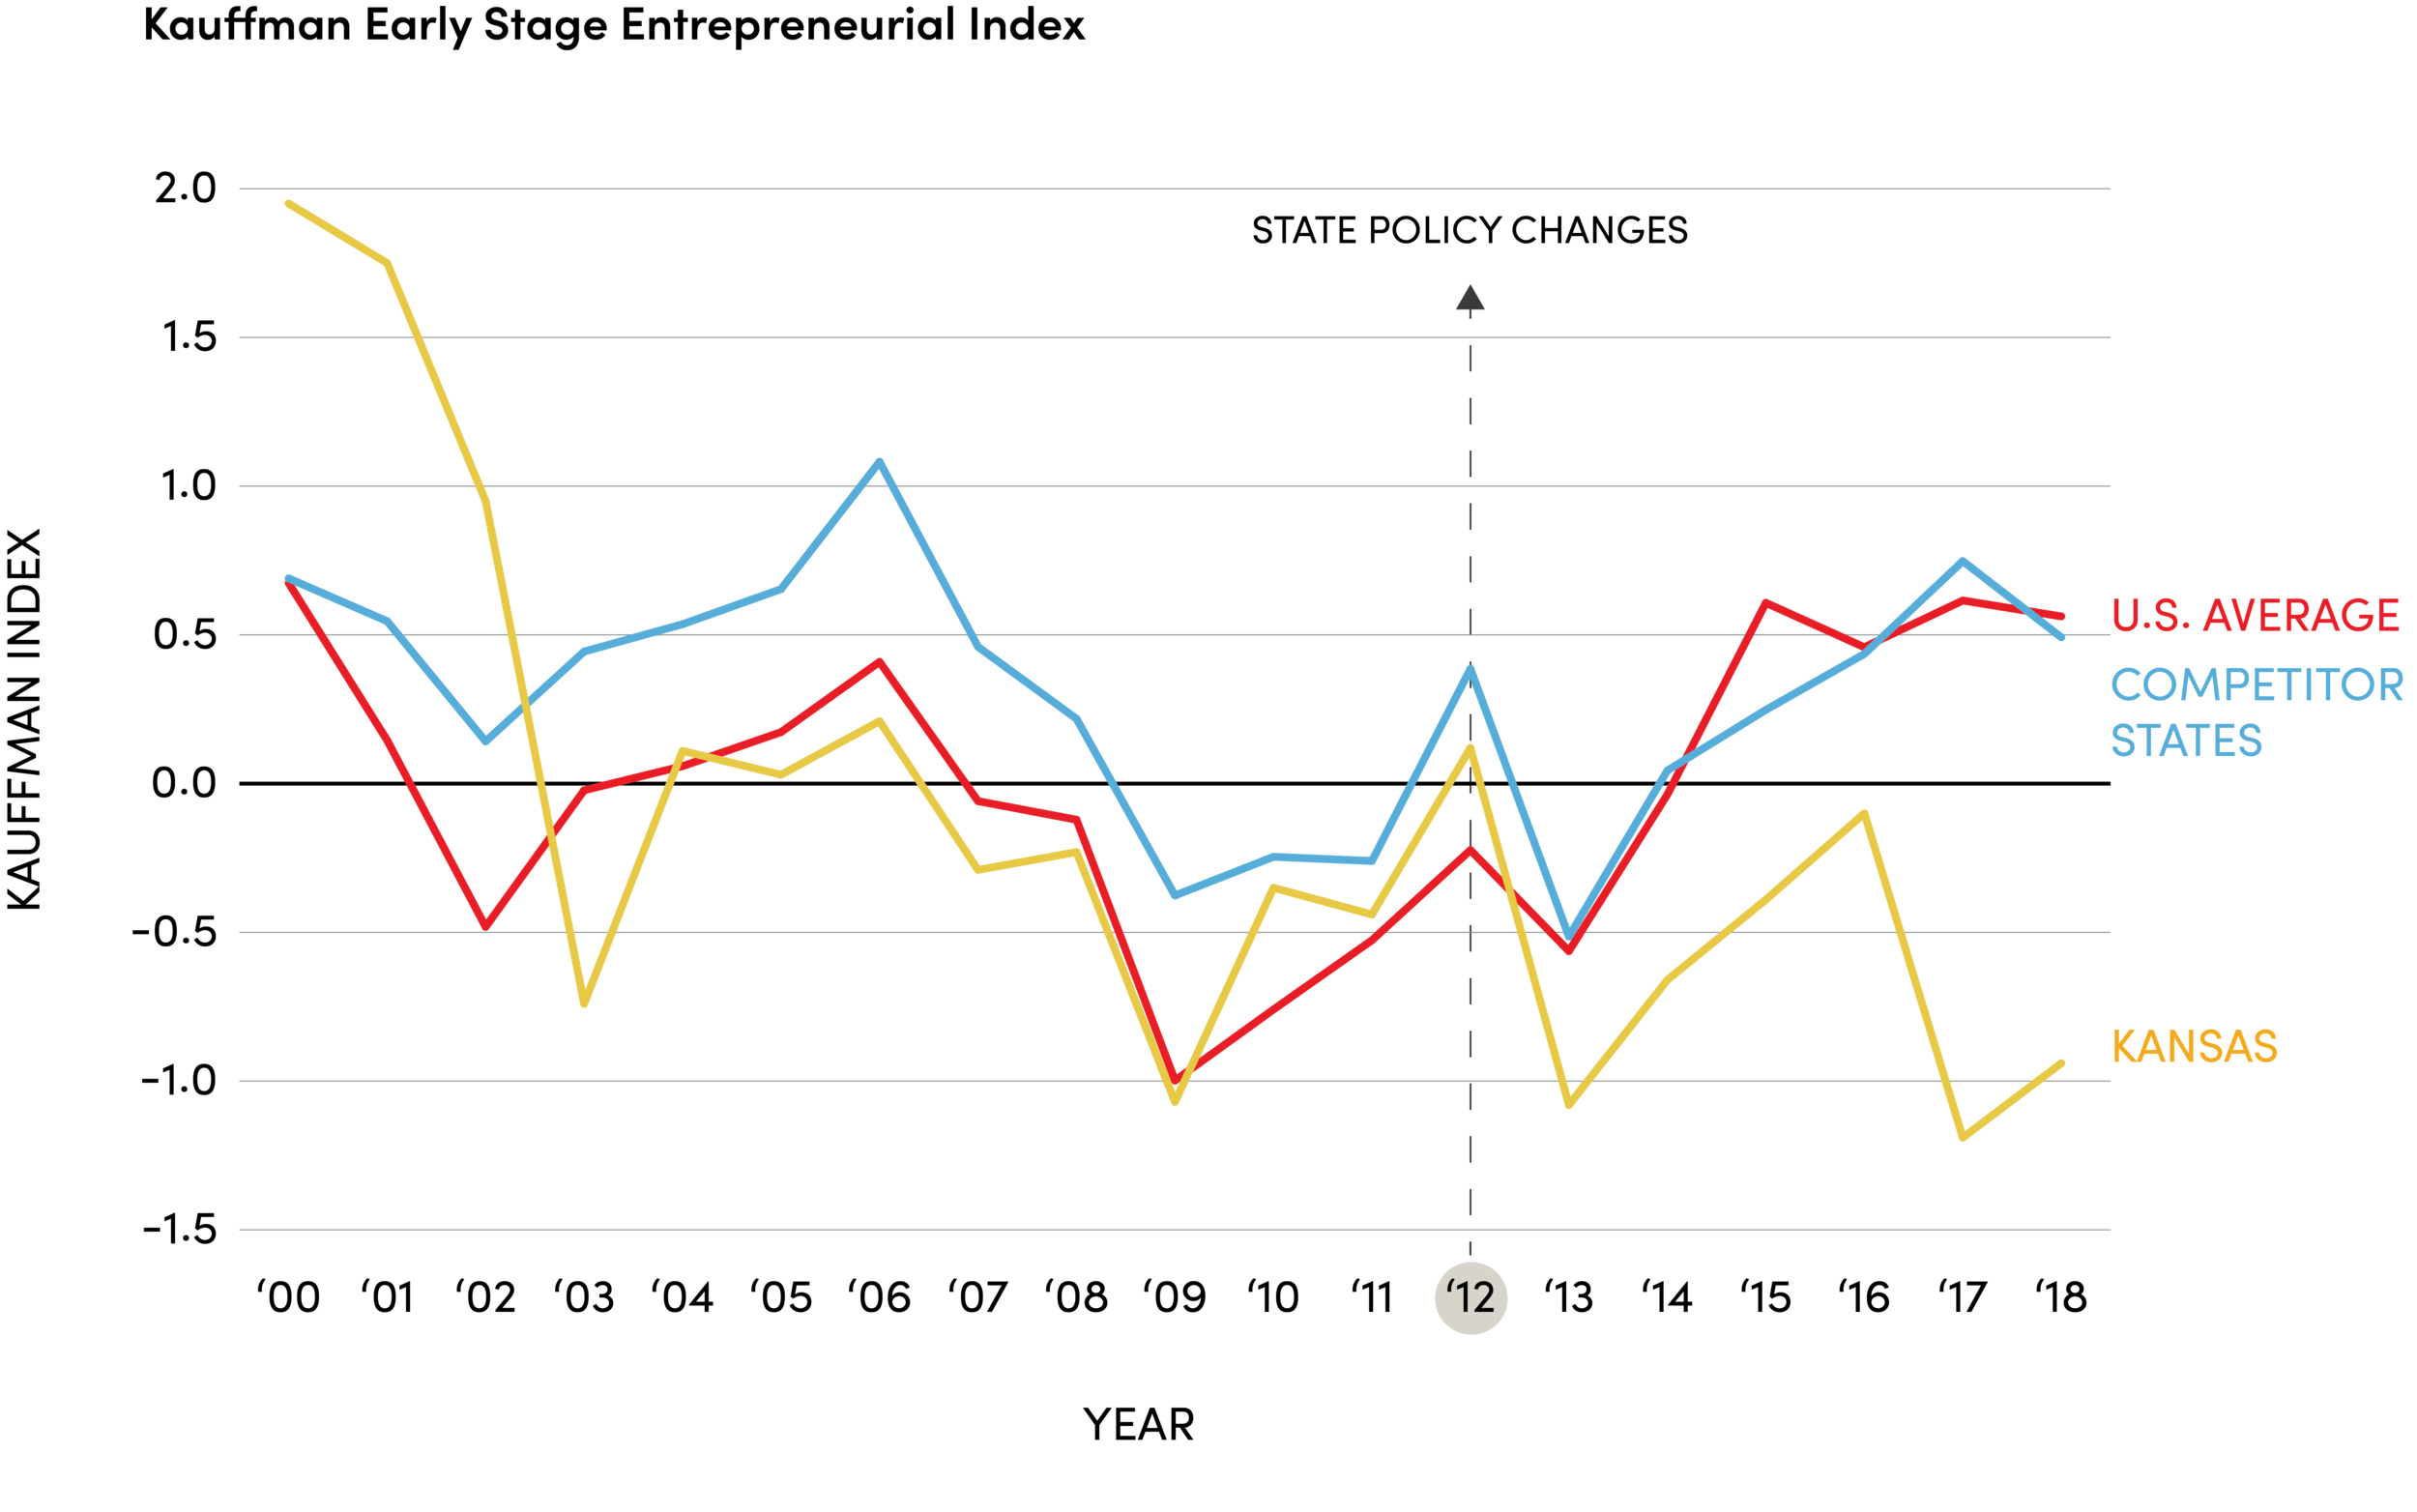 A time-series graph showing the entreprenueral index for the US, Kansas, and other competing states, with Kansas being the lowest on 2018.